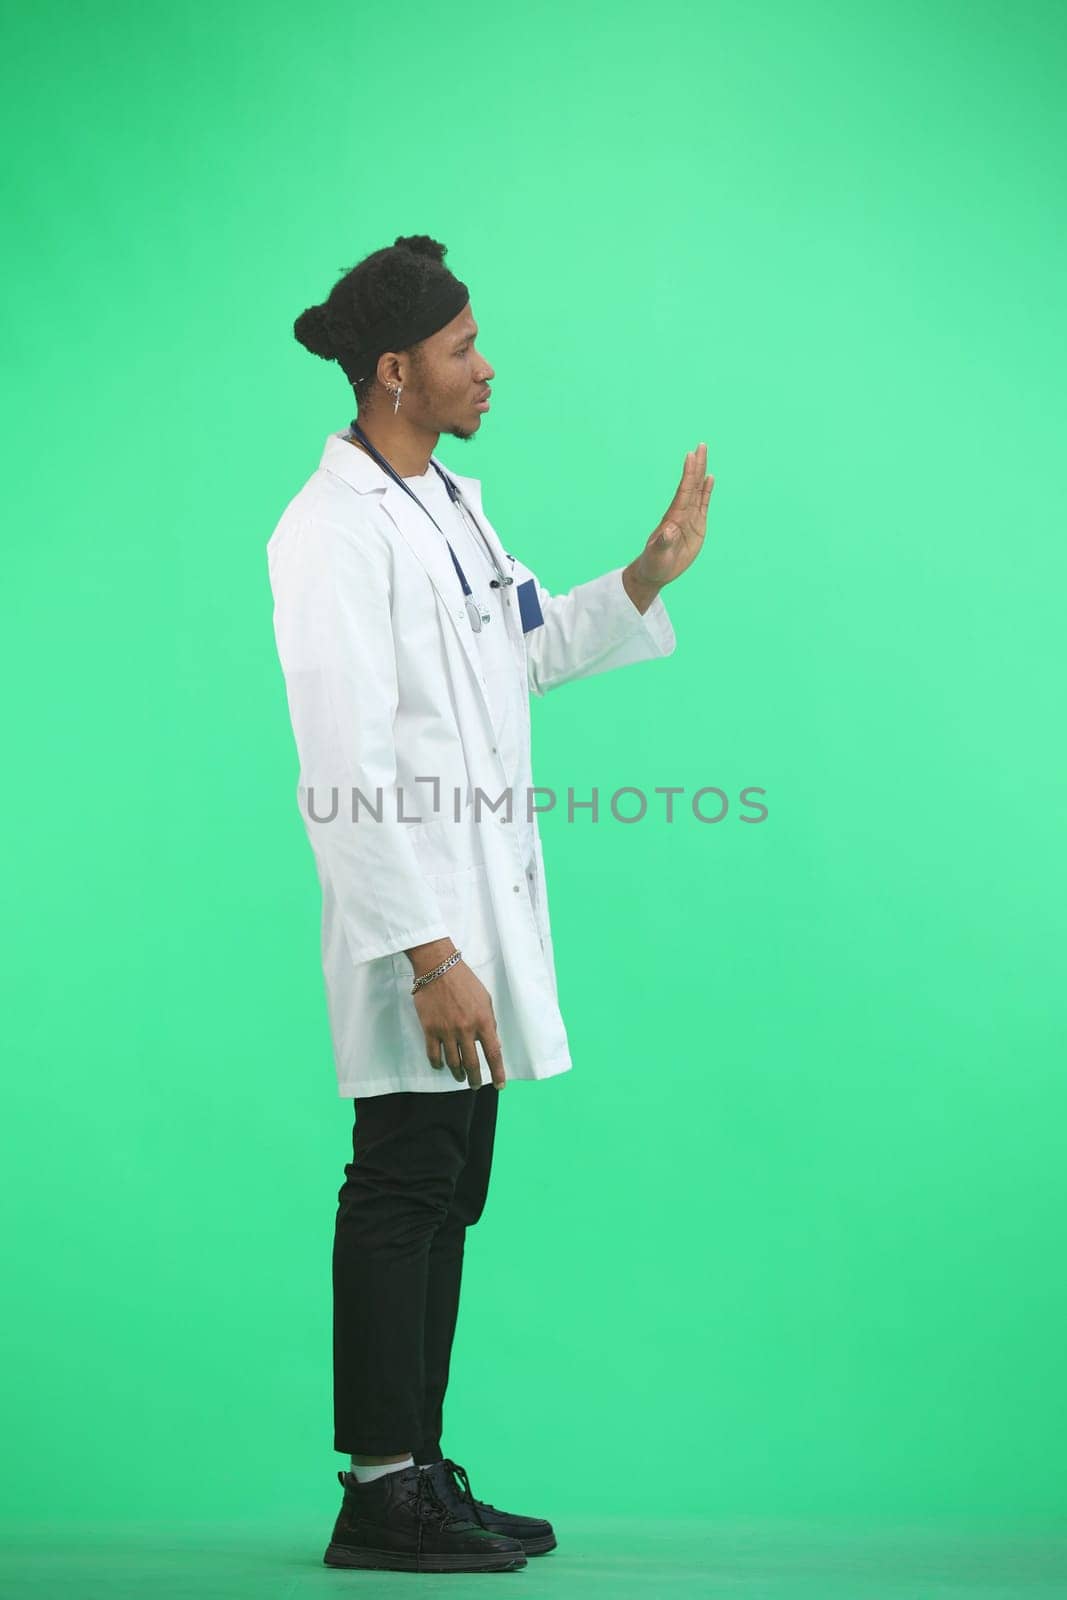 The doctor, in full height, on a green background, shows a stop sign.